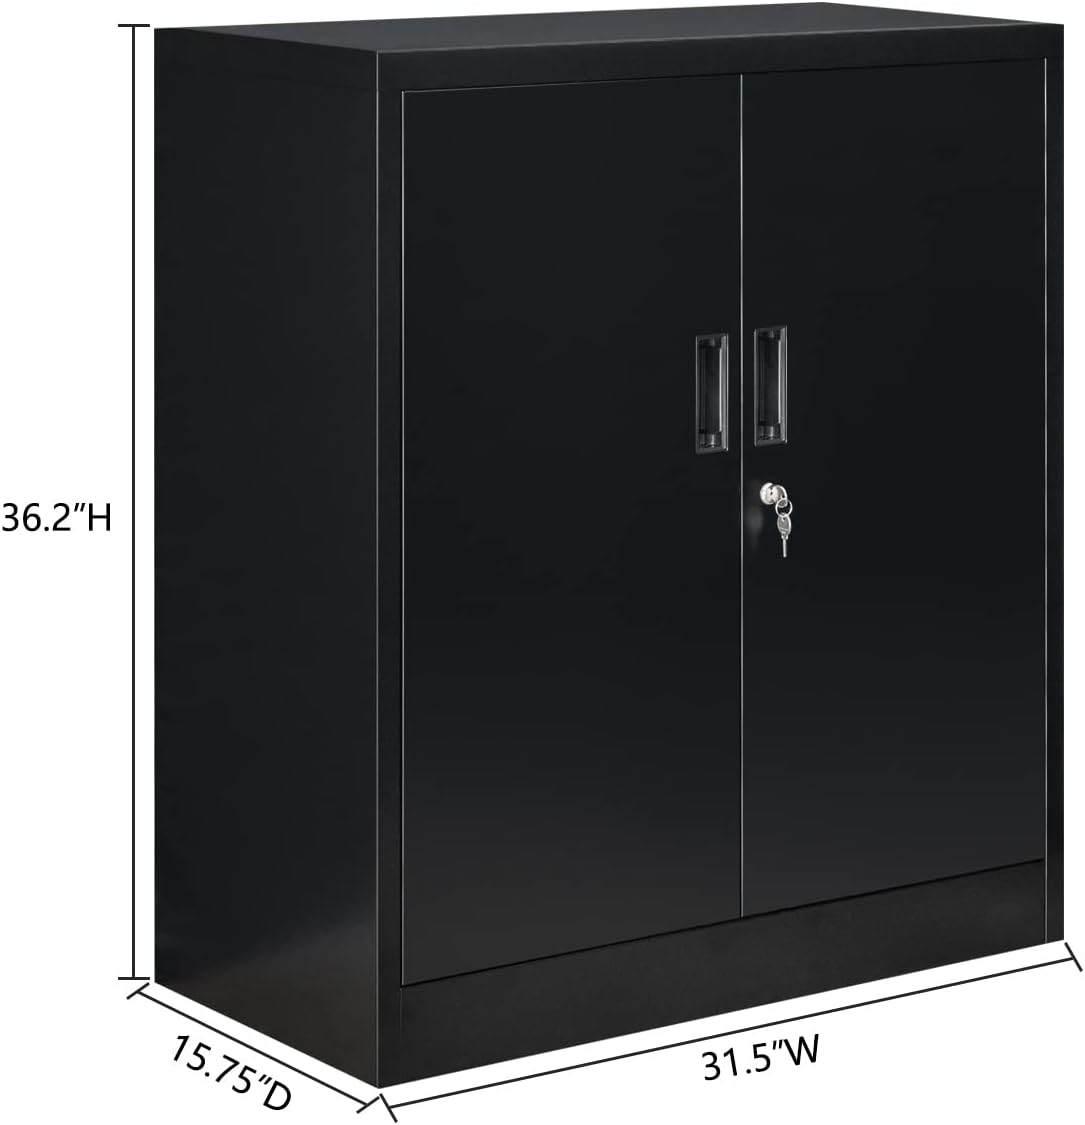 CJF Metal Storage Cabinets with Shelves and Doors - $90